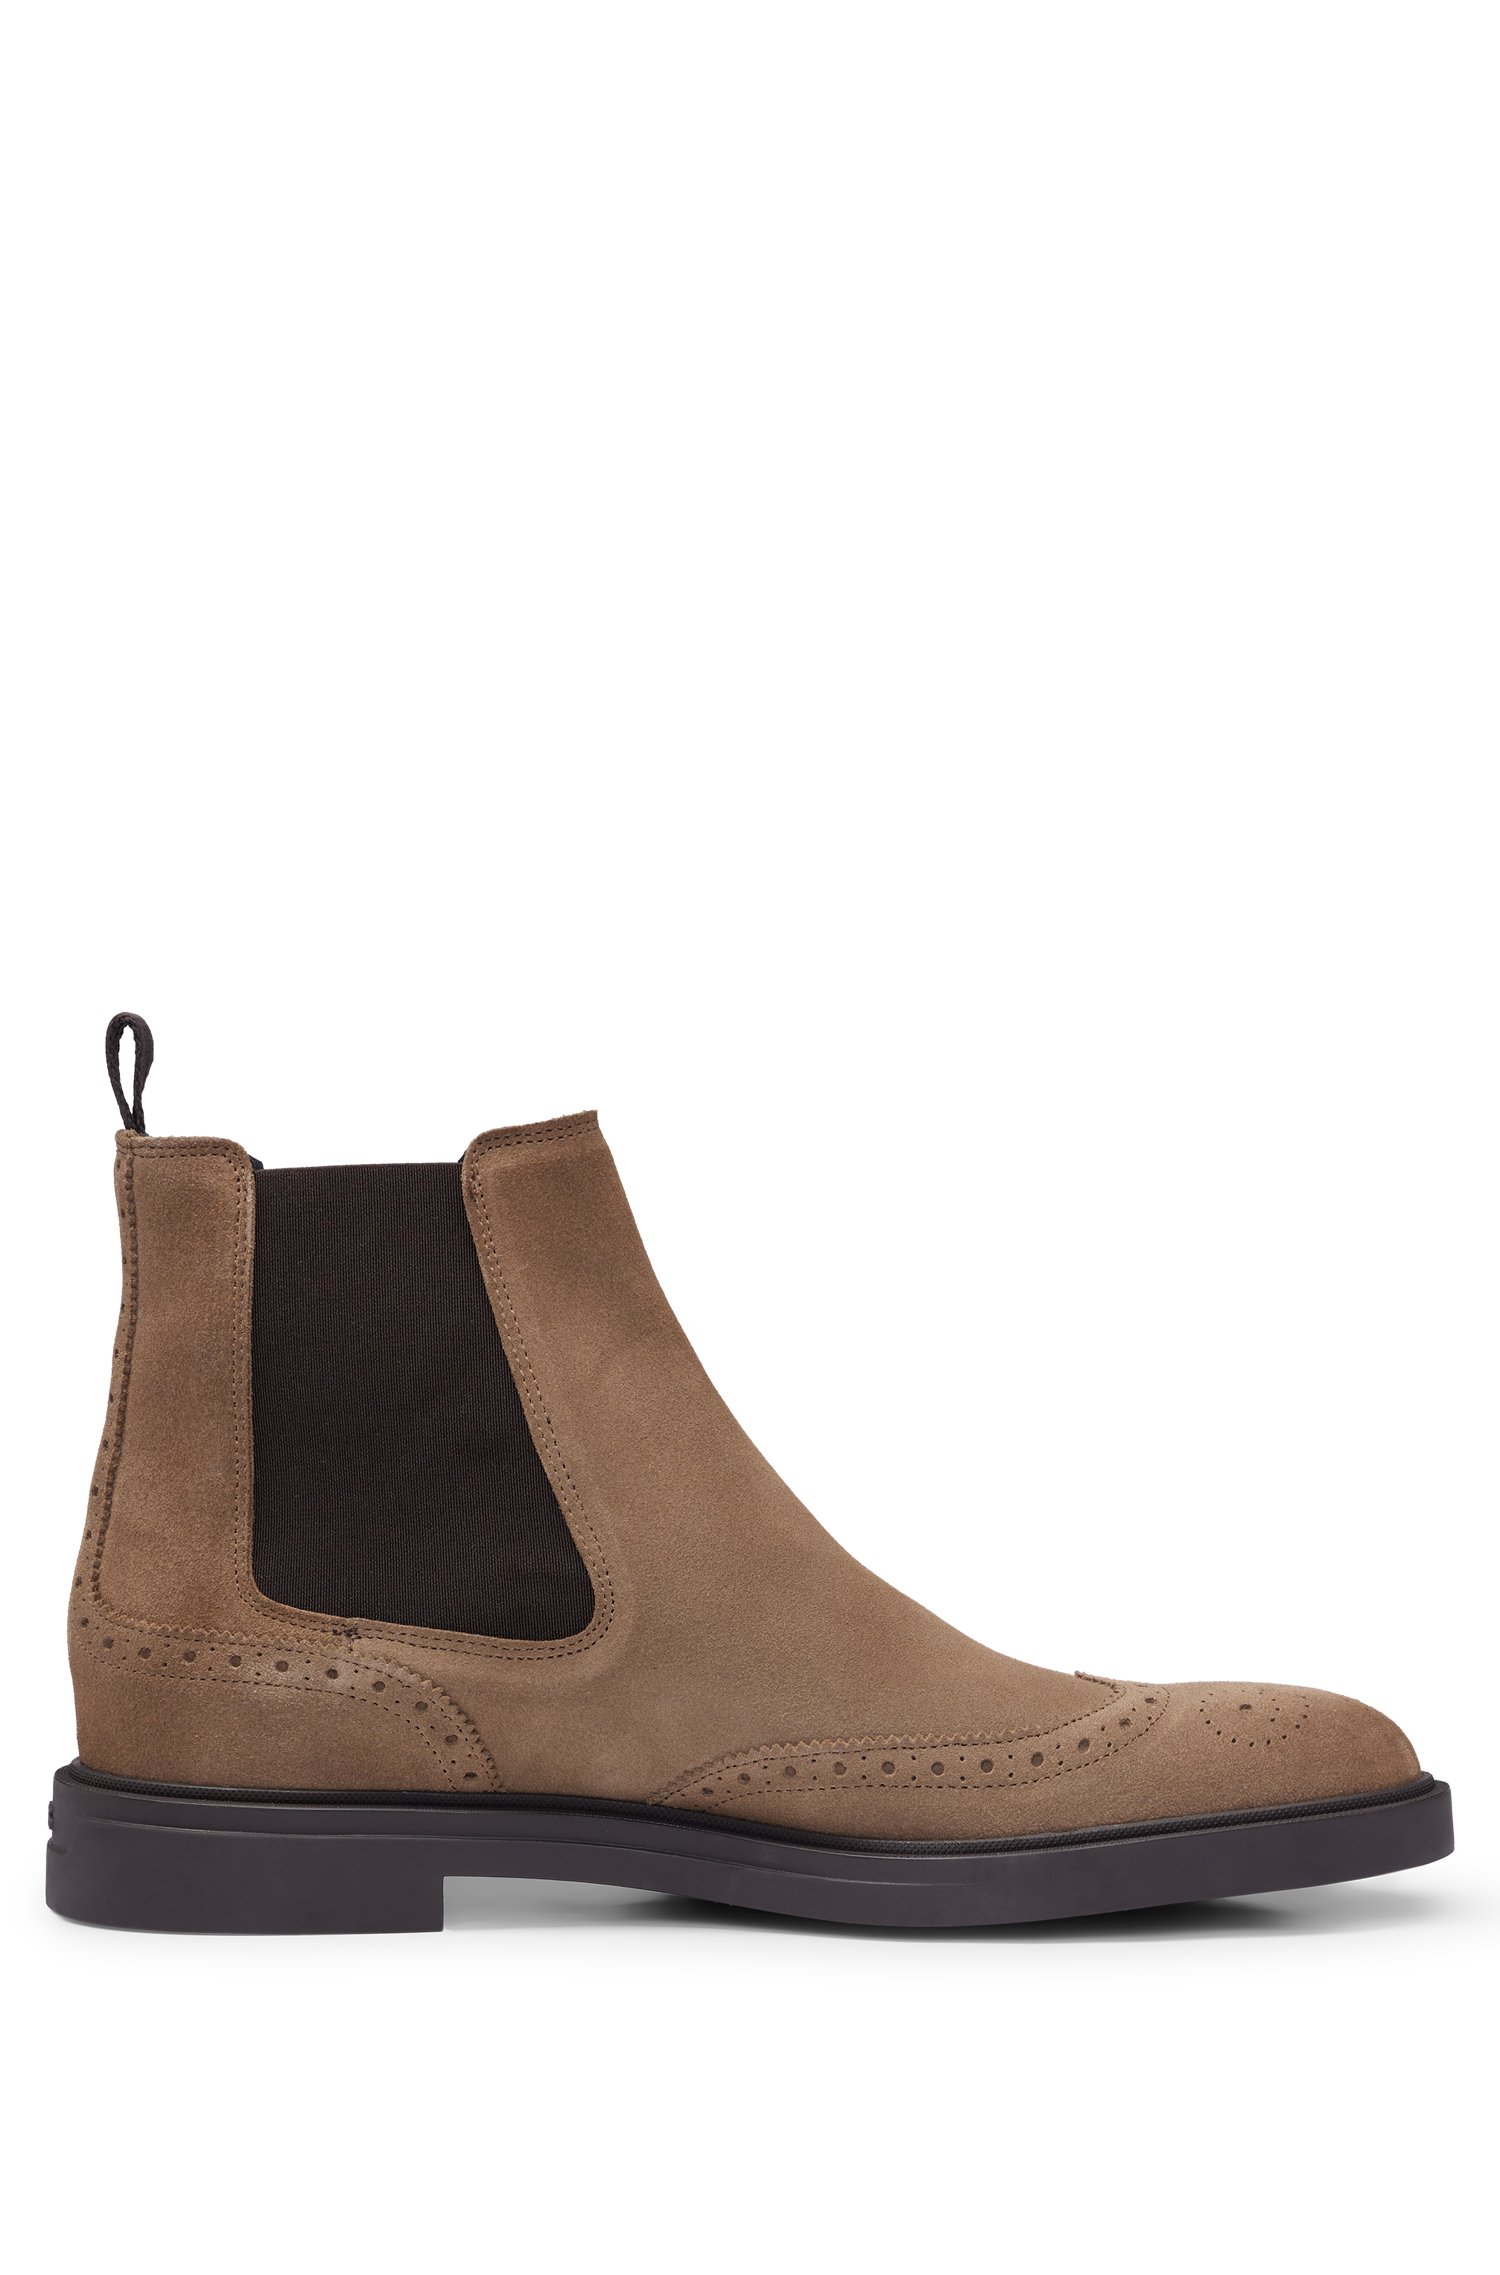 Suede Chelsea boots with brogue details